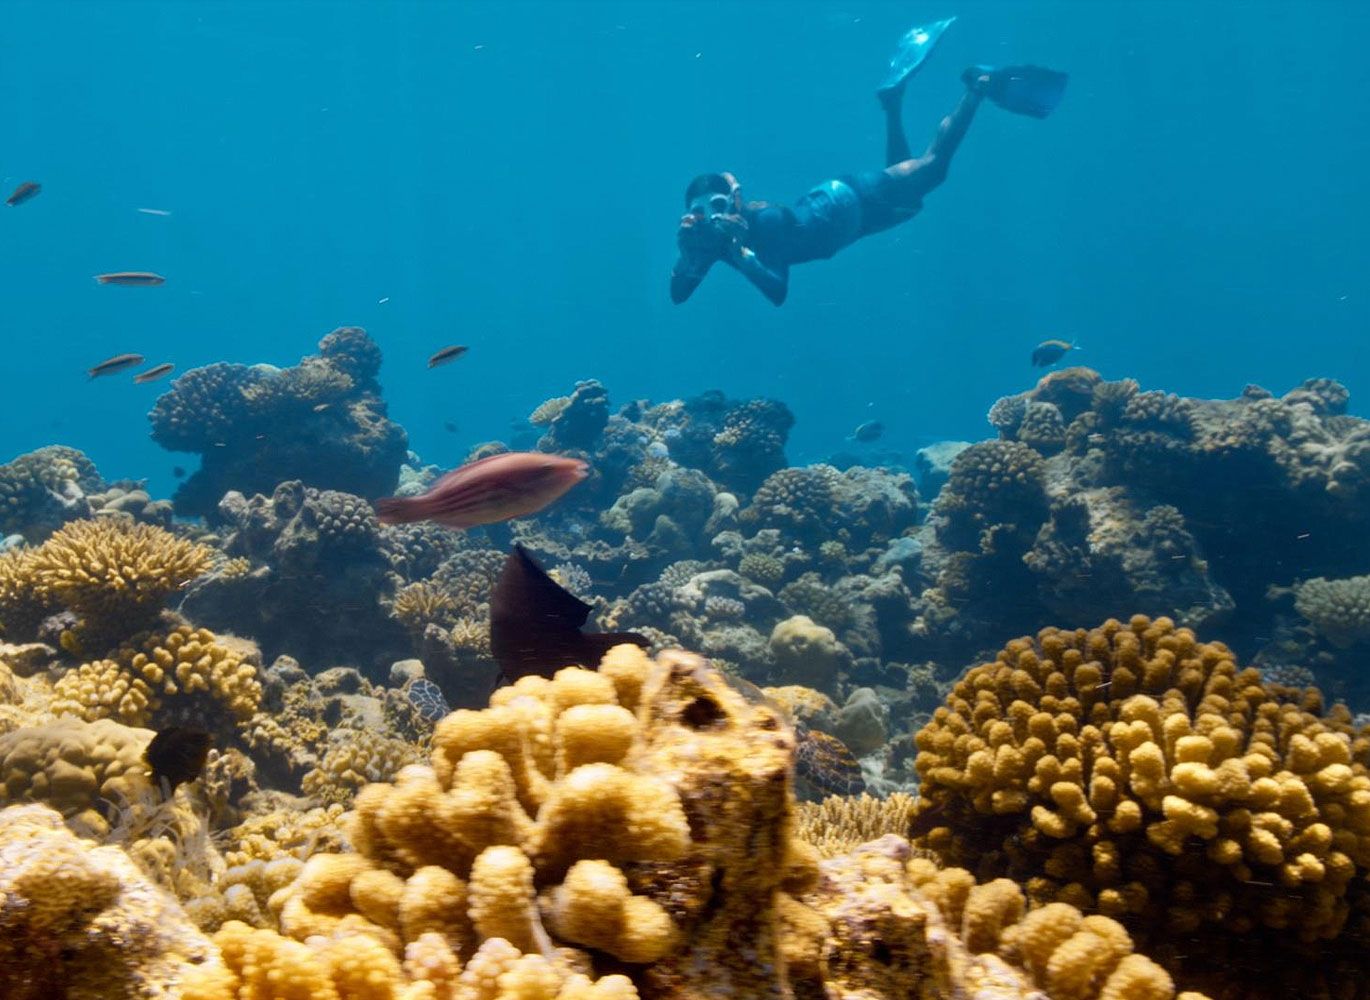 A diver and coral under the sea.